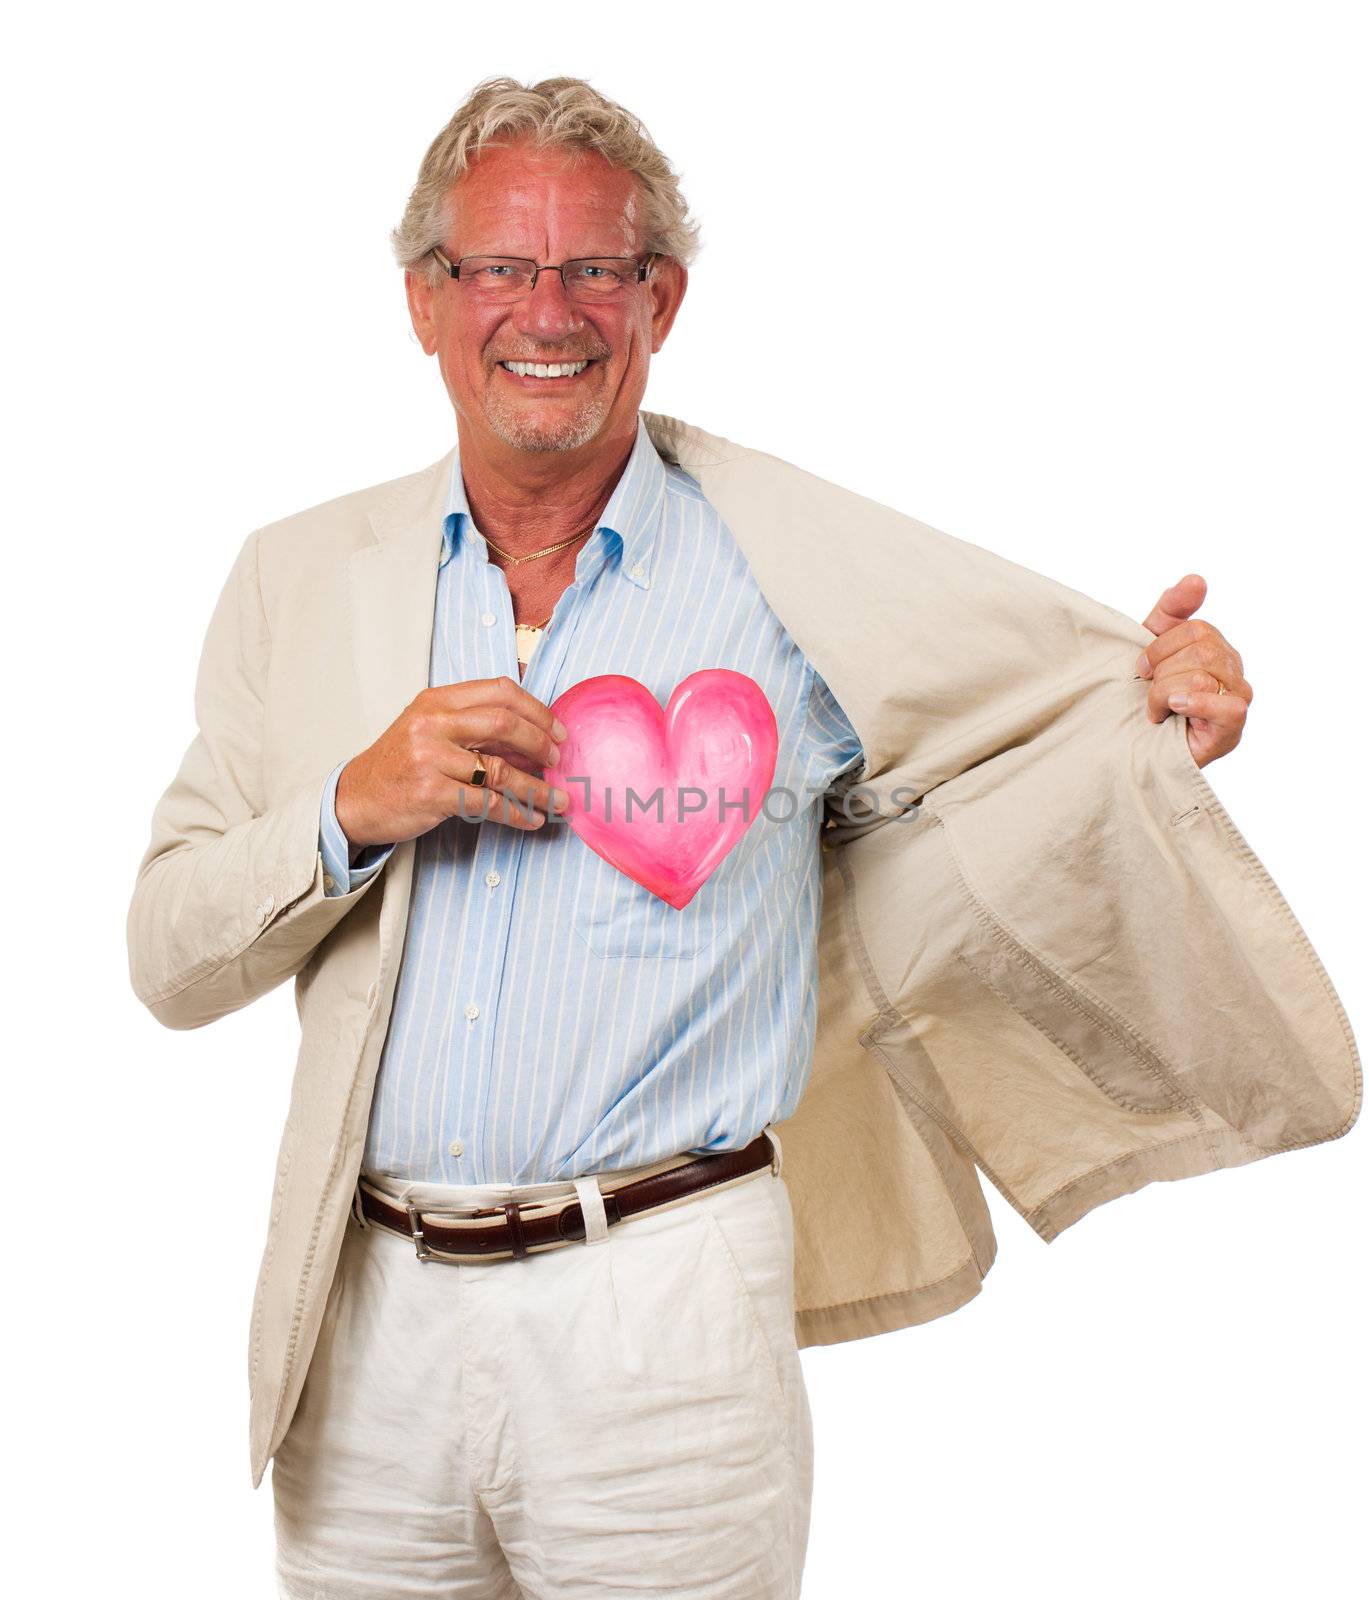 Healthy man holding love heart in front of chest by Jaykayl